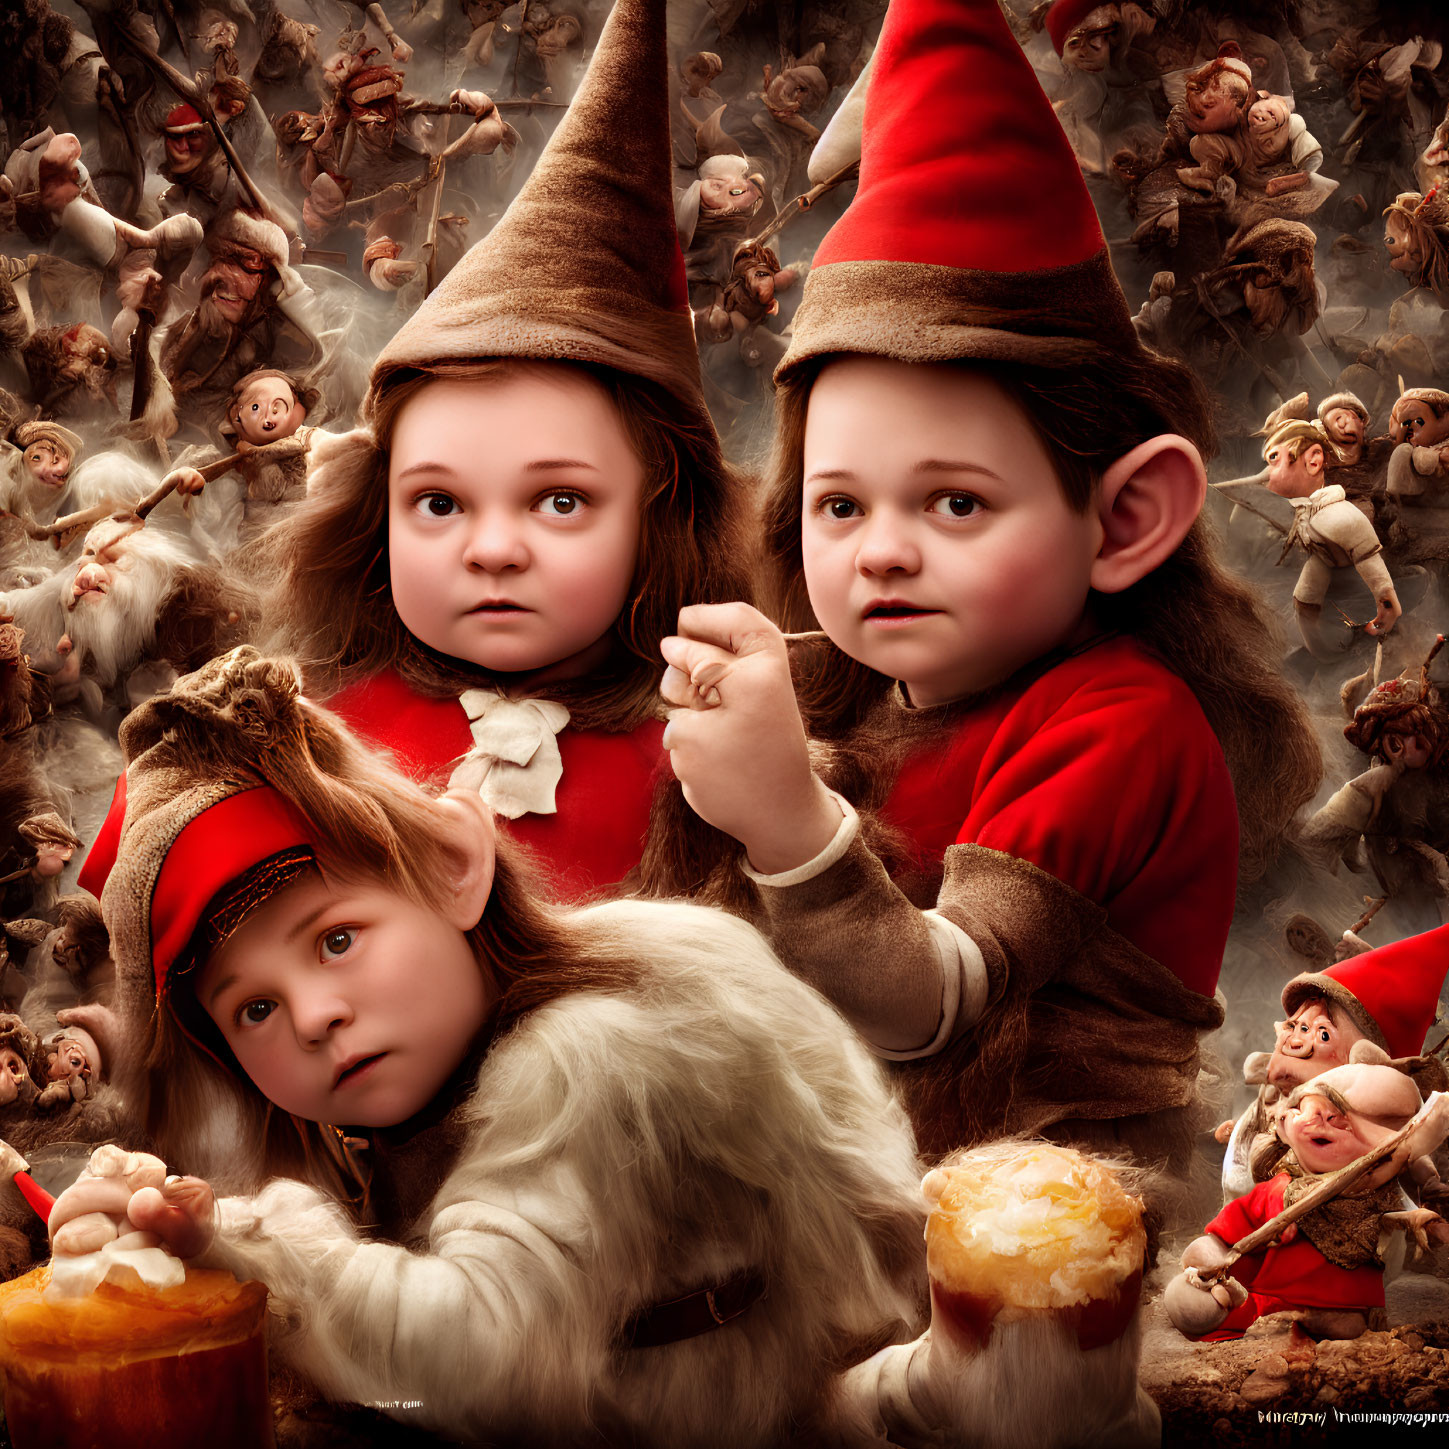 Children in whimsical gnome costumes with flying monkeys in a fairytale setting.